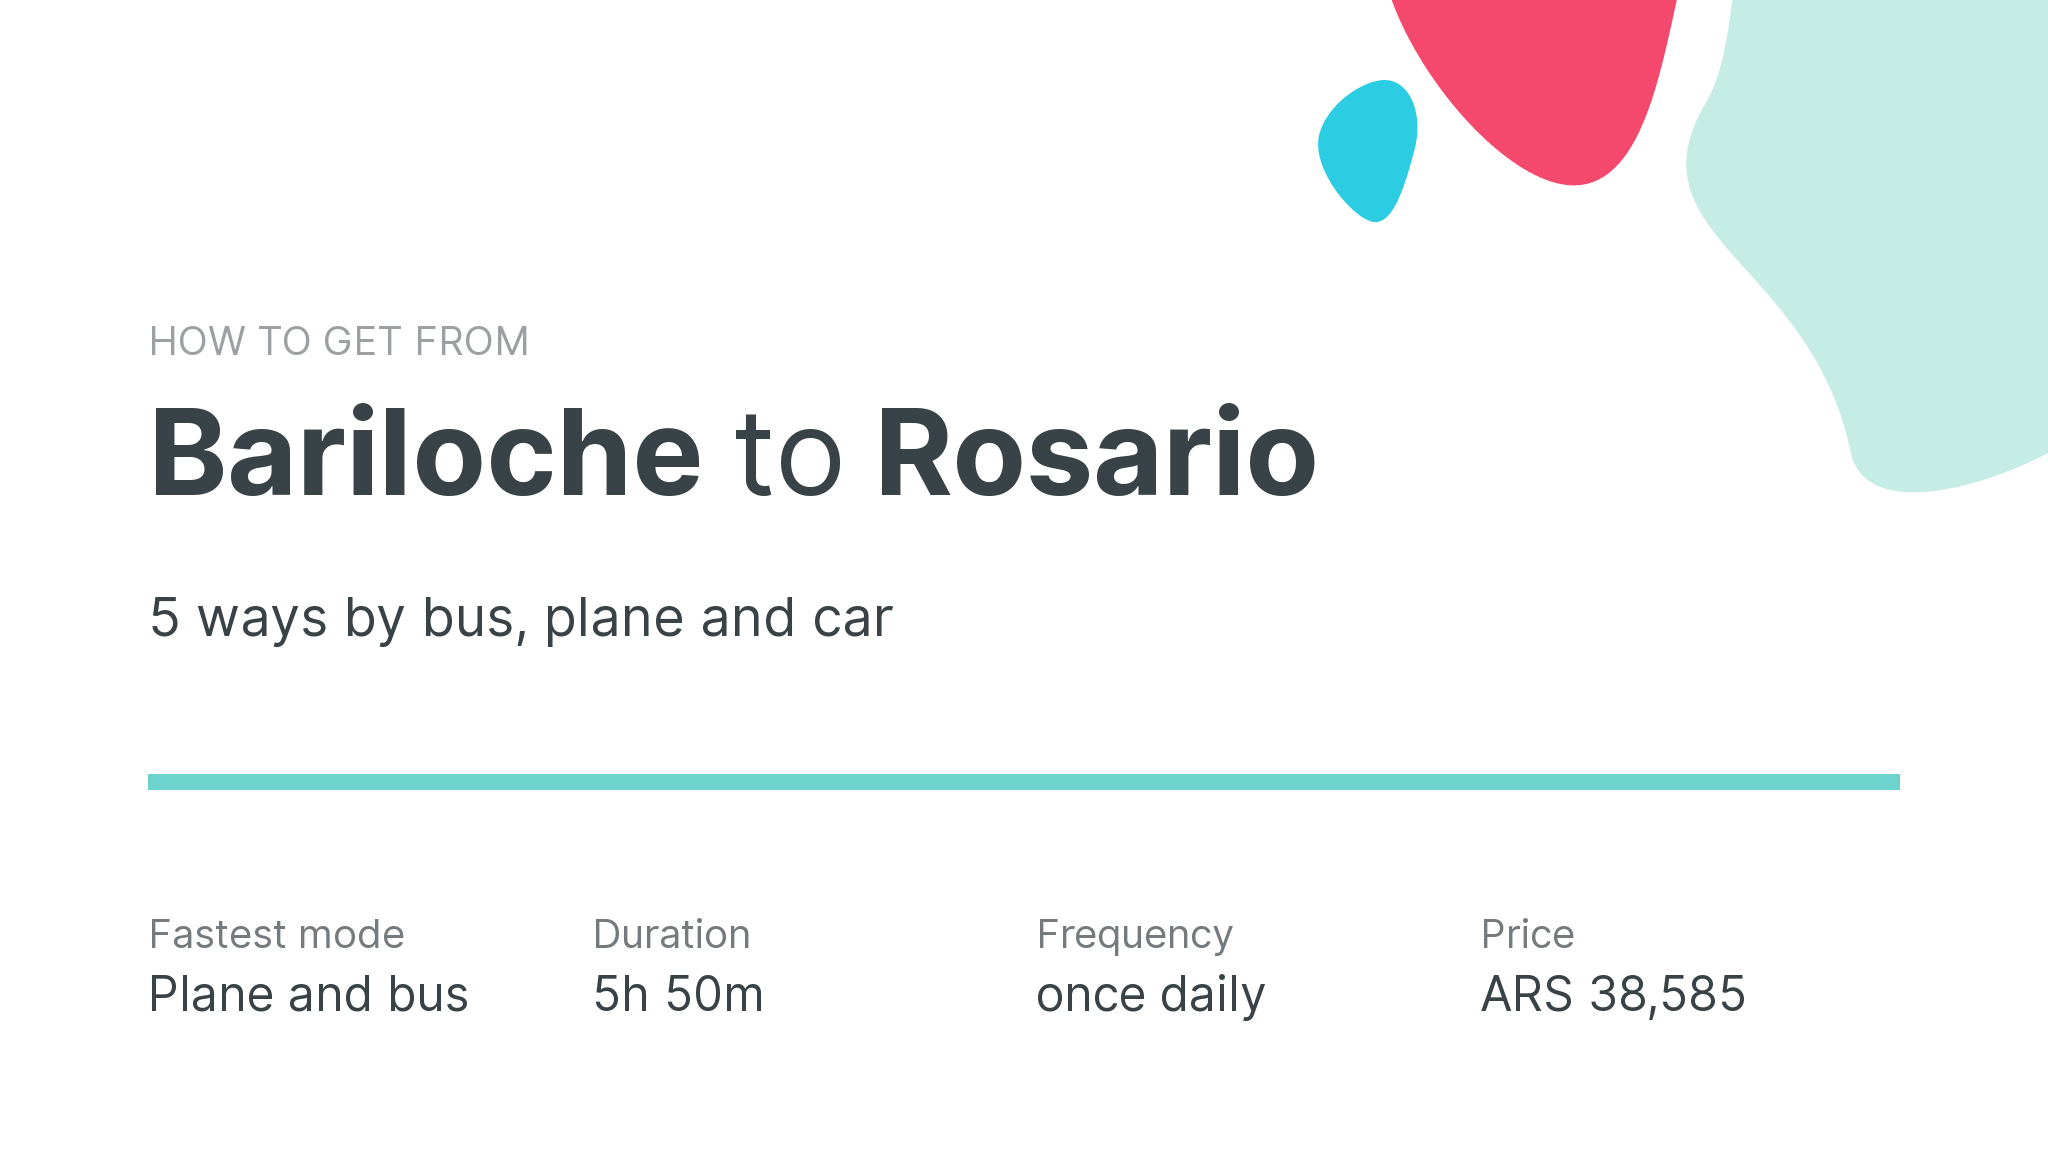 How do I get from Bariloche to Rosario